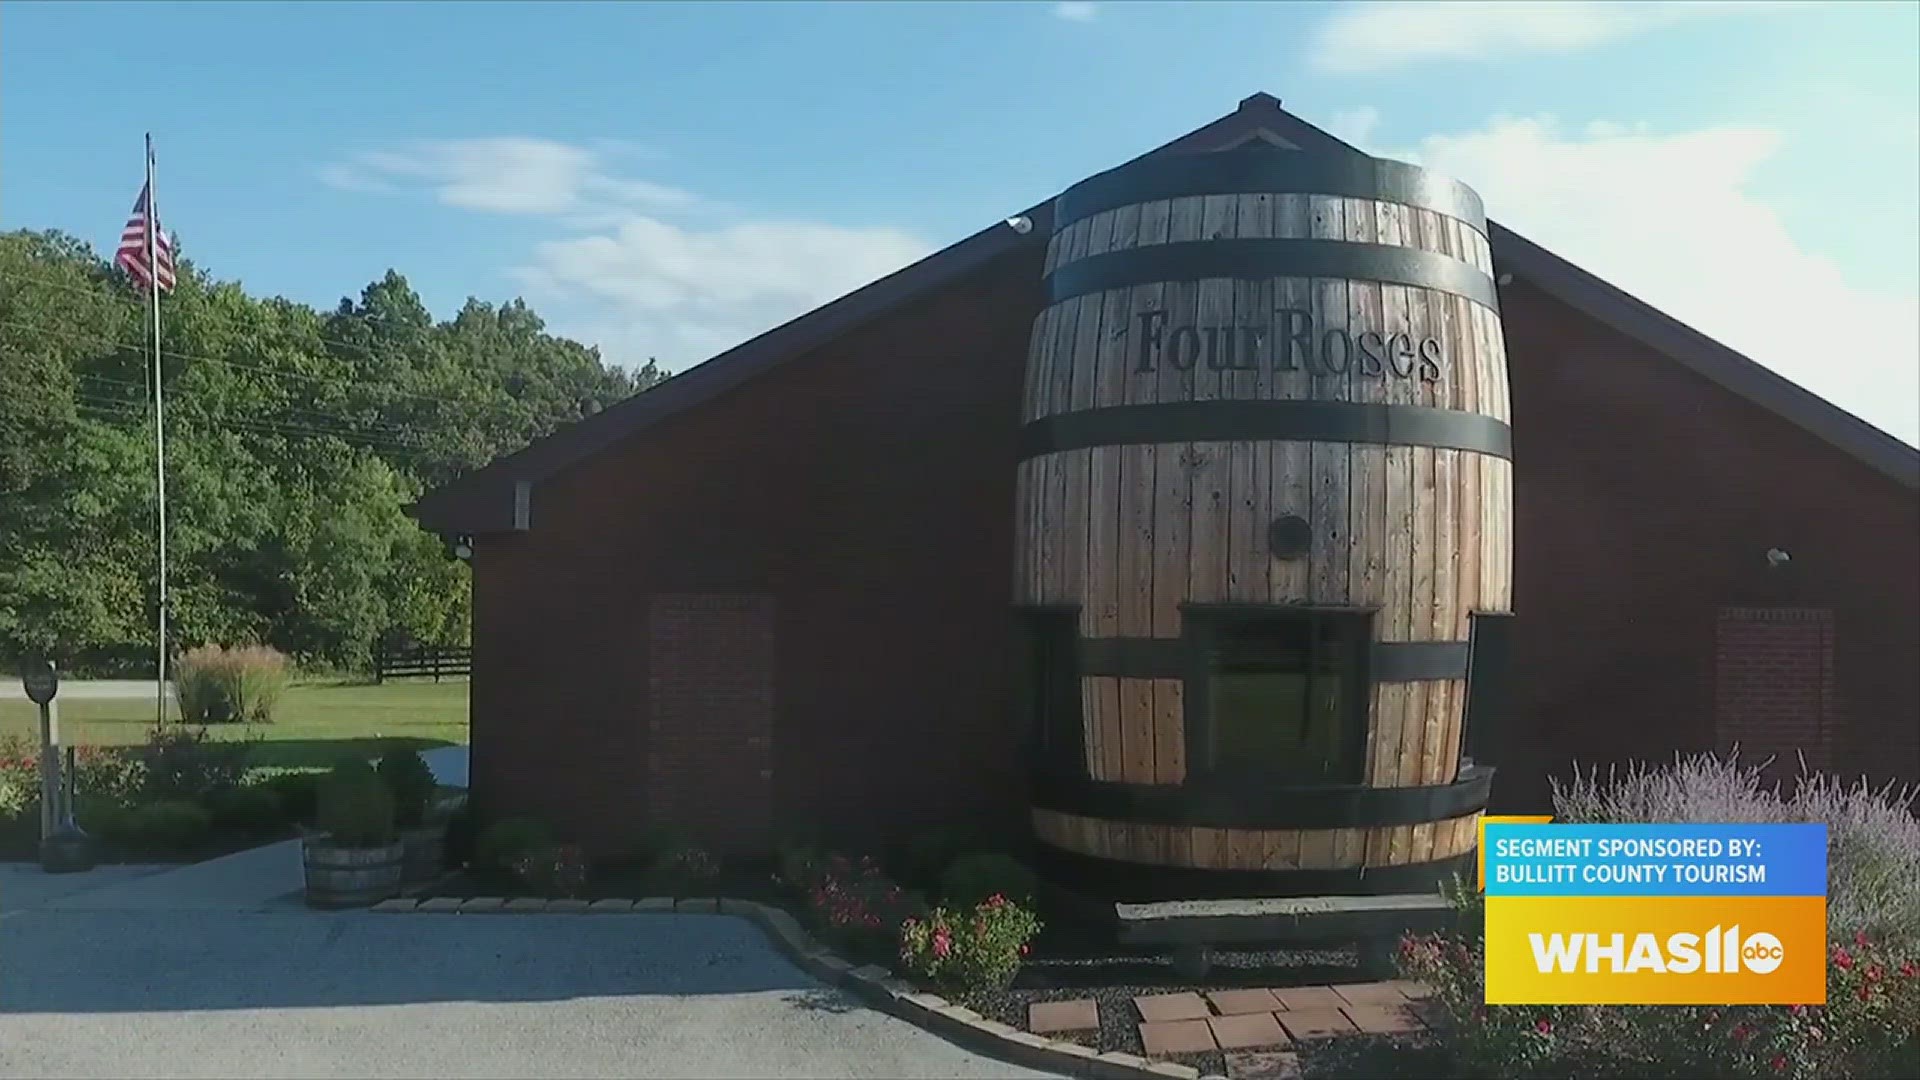 Four Roses Bourbon has 300 acres with 28 warehouses that are all open to guests to experience their tastings!